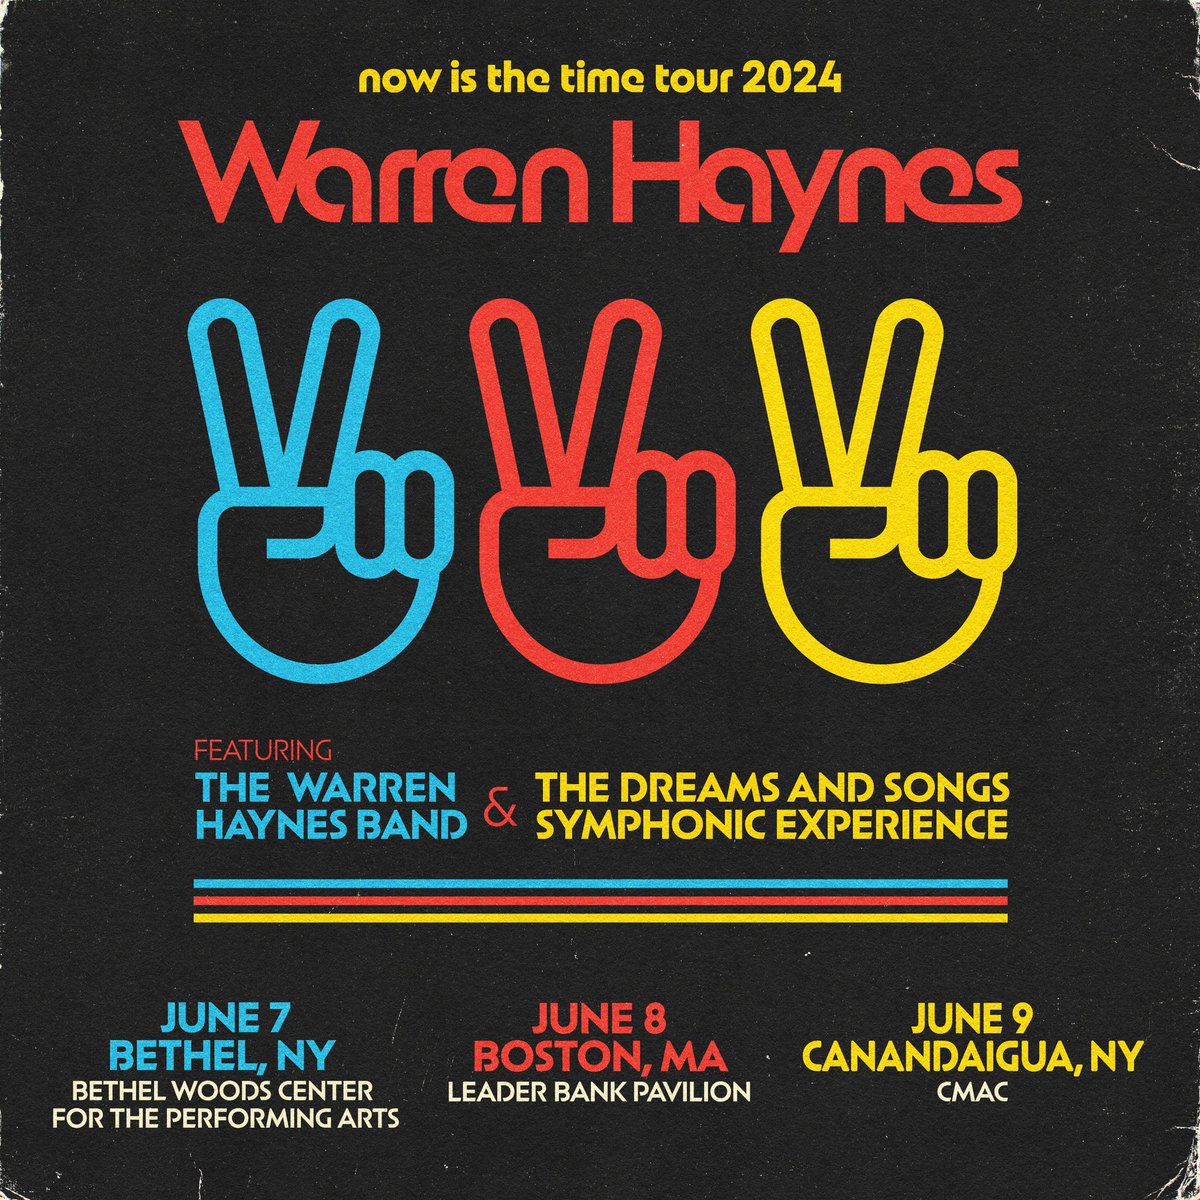 WHB 'Now Is The Time' Tour presale starts tomorrow at 10am local! PW: WARRENPEACE warrenhaynes.net